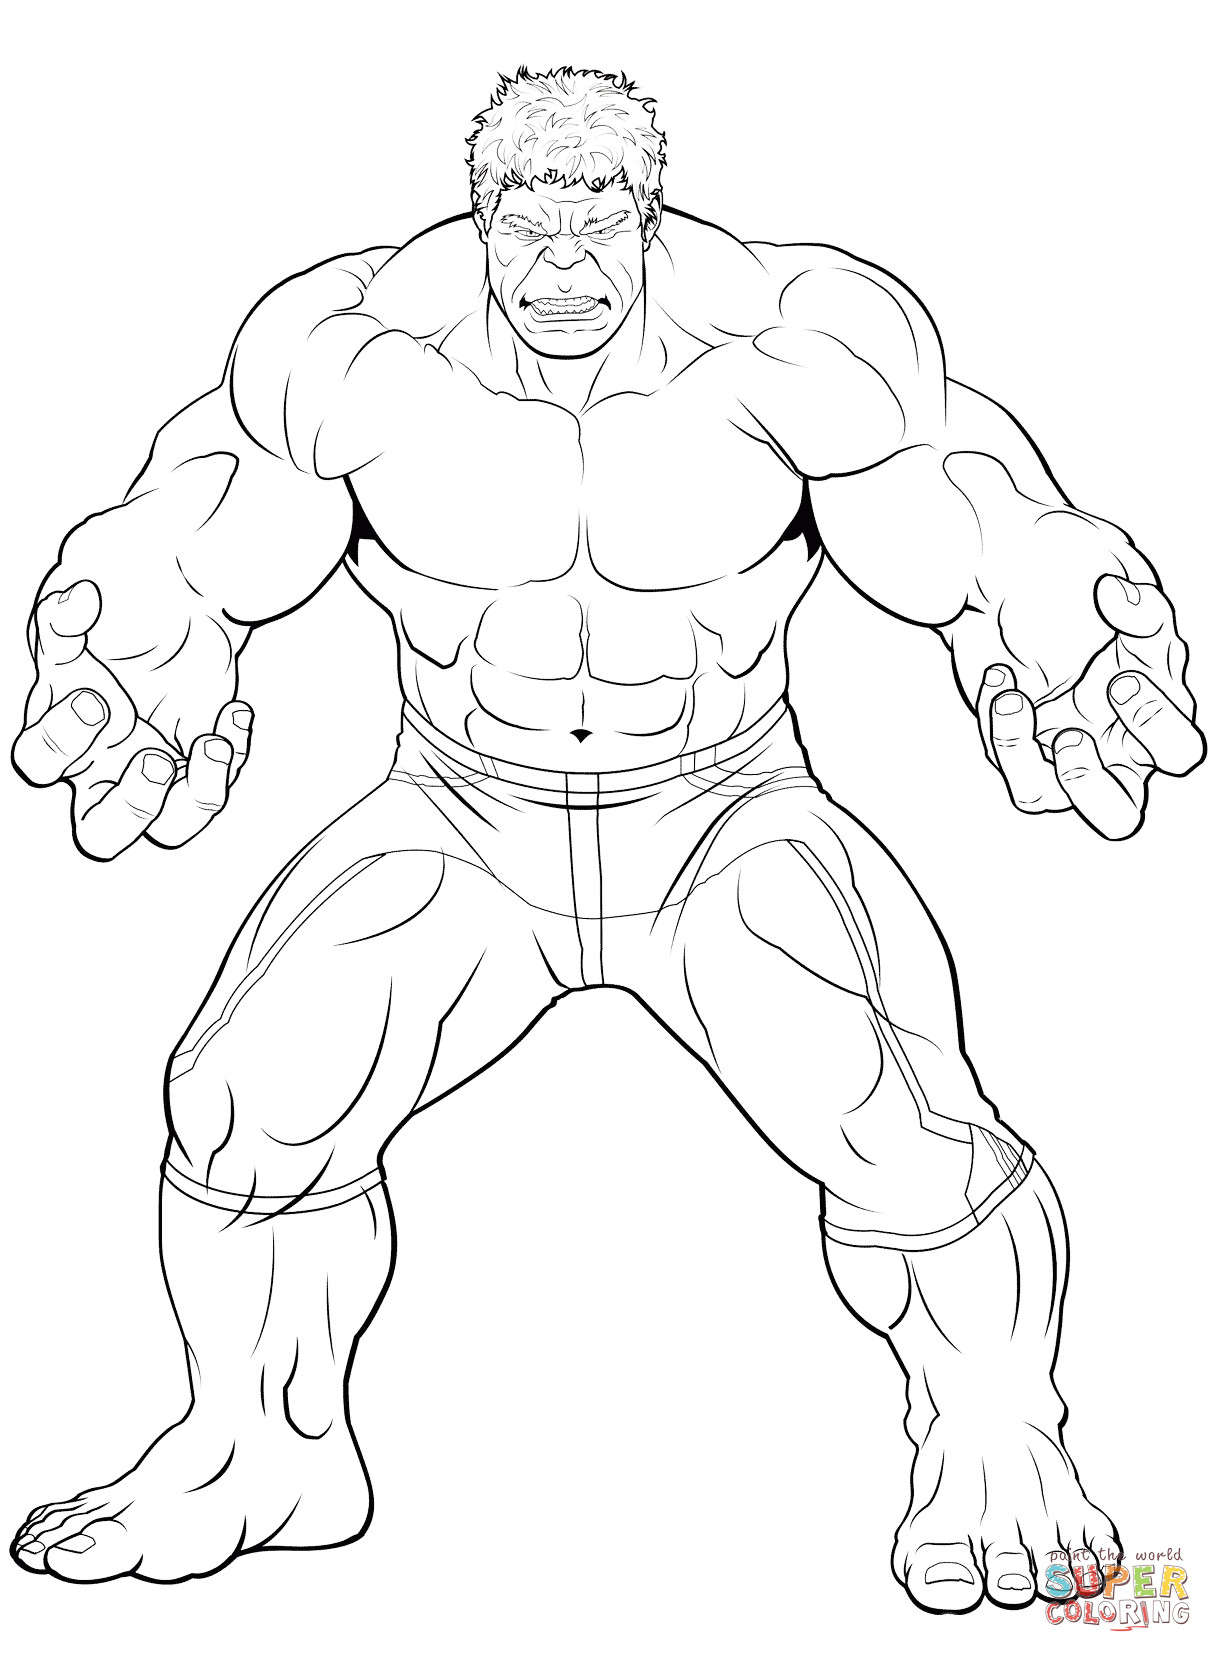 Avengers Coloring Pages Printable
 Avengers The Hulk coloring page